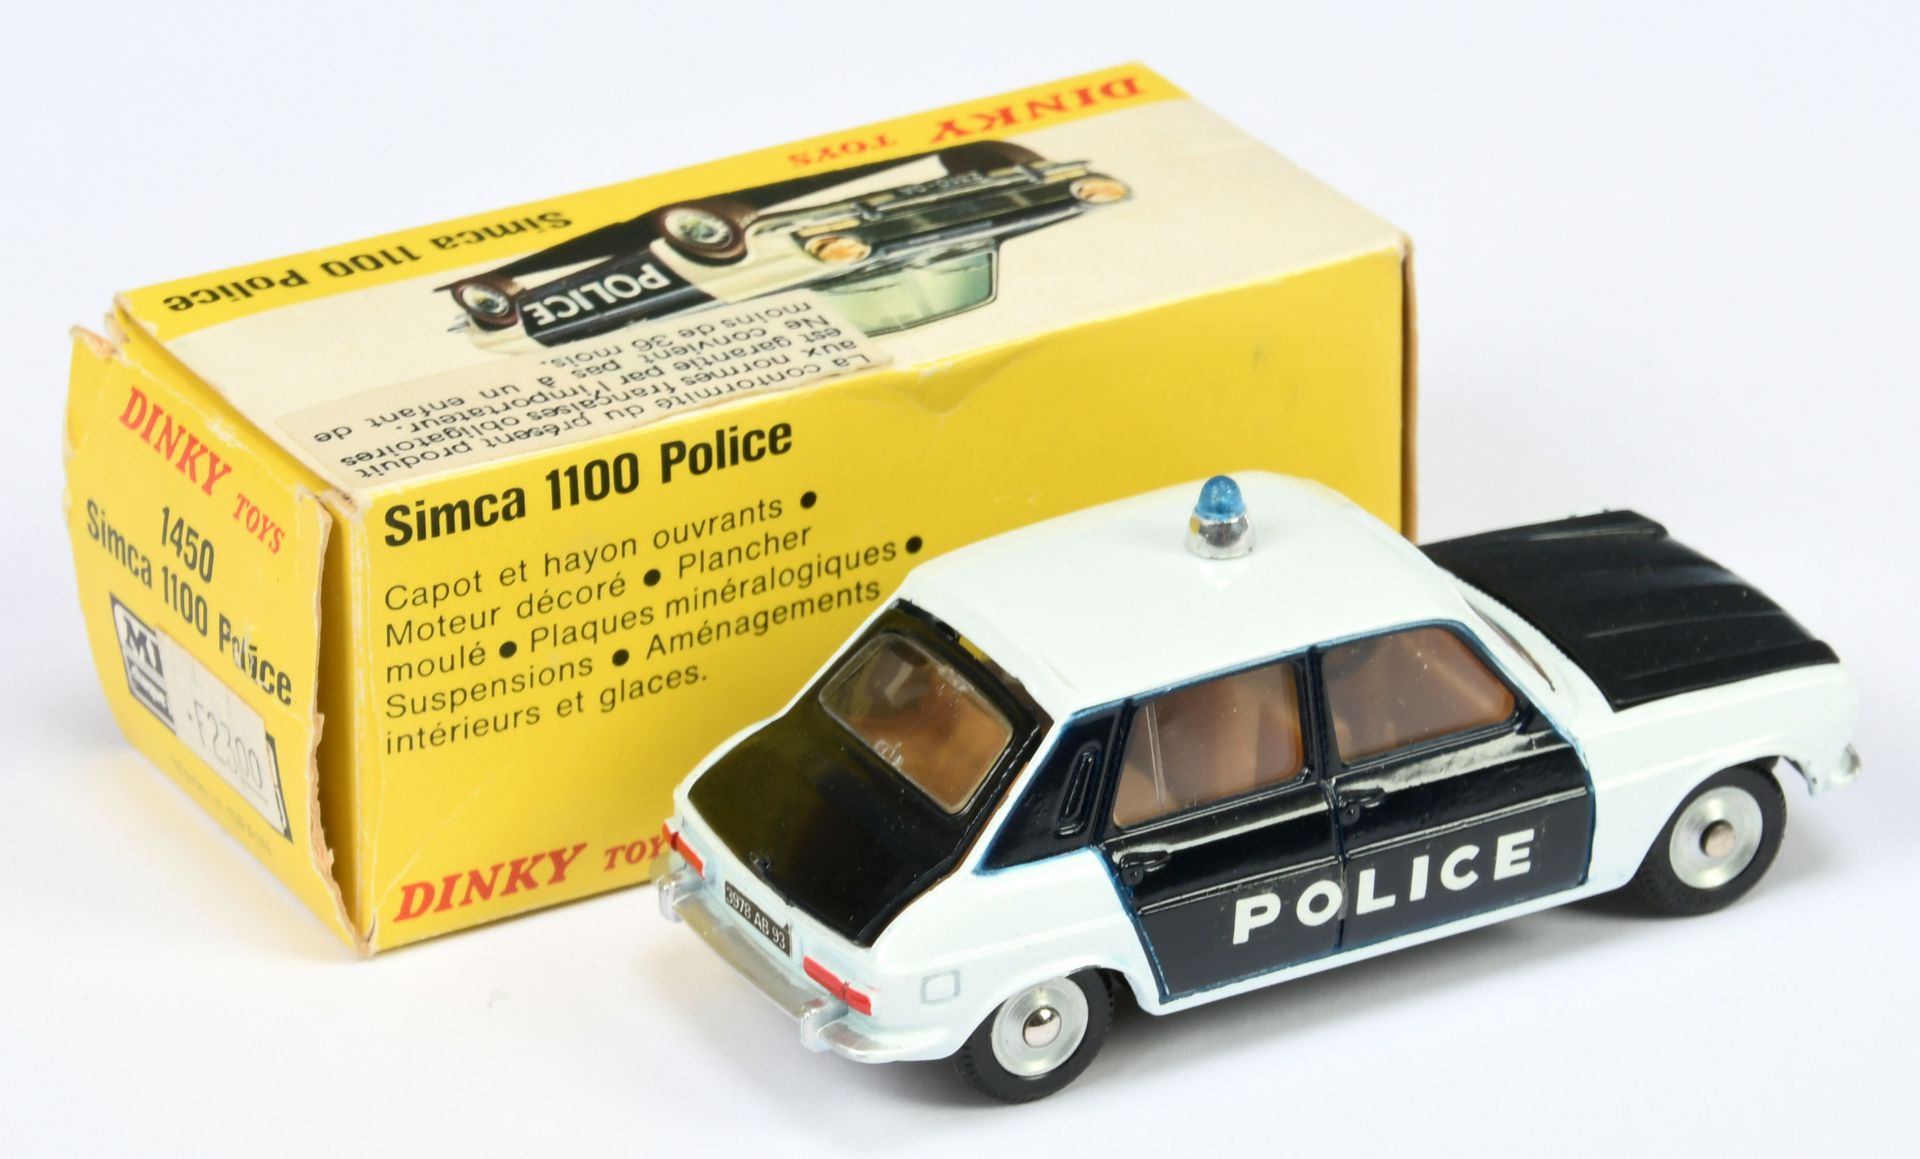 French Dinky Toys 1450 Simca 1100 "Police" car - White and Navy blue with tan interior, blue roof... - Bild 2 aus 2